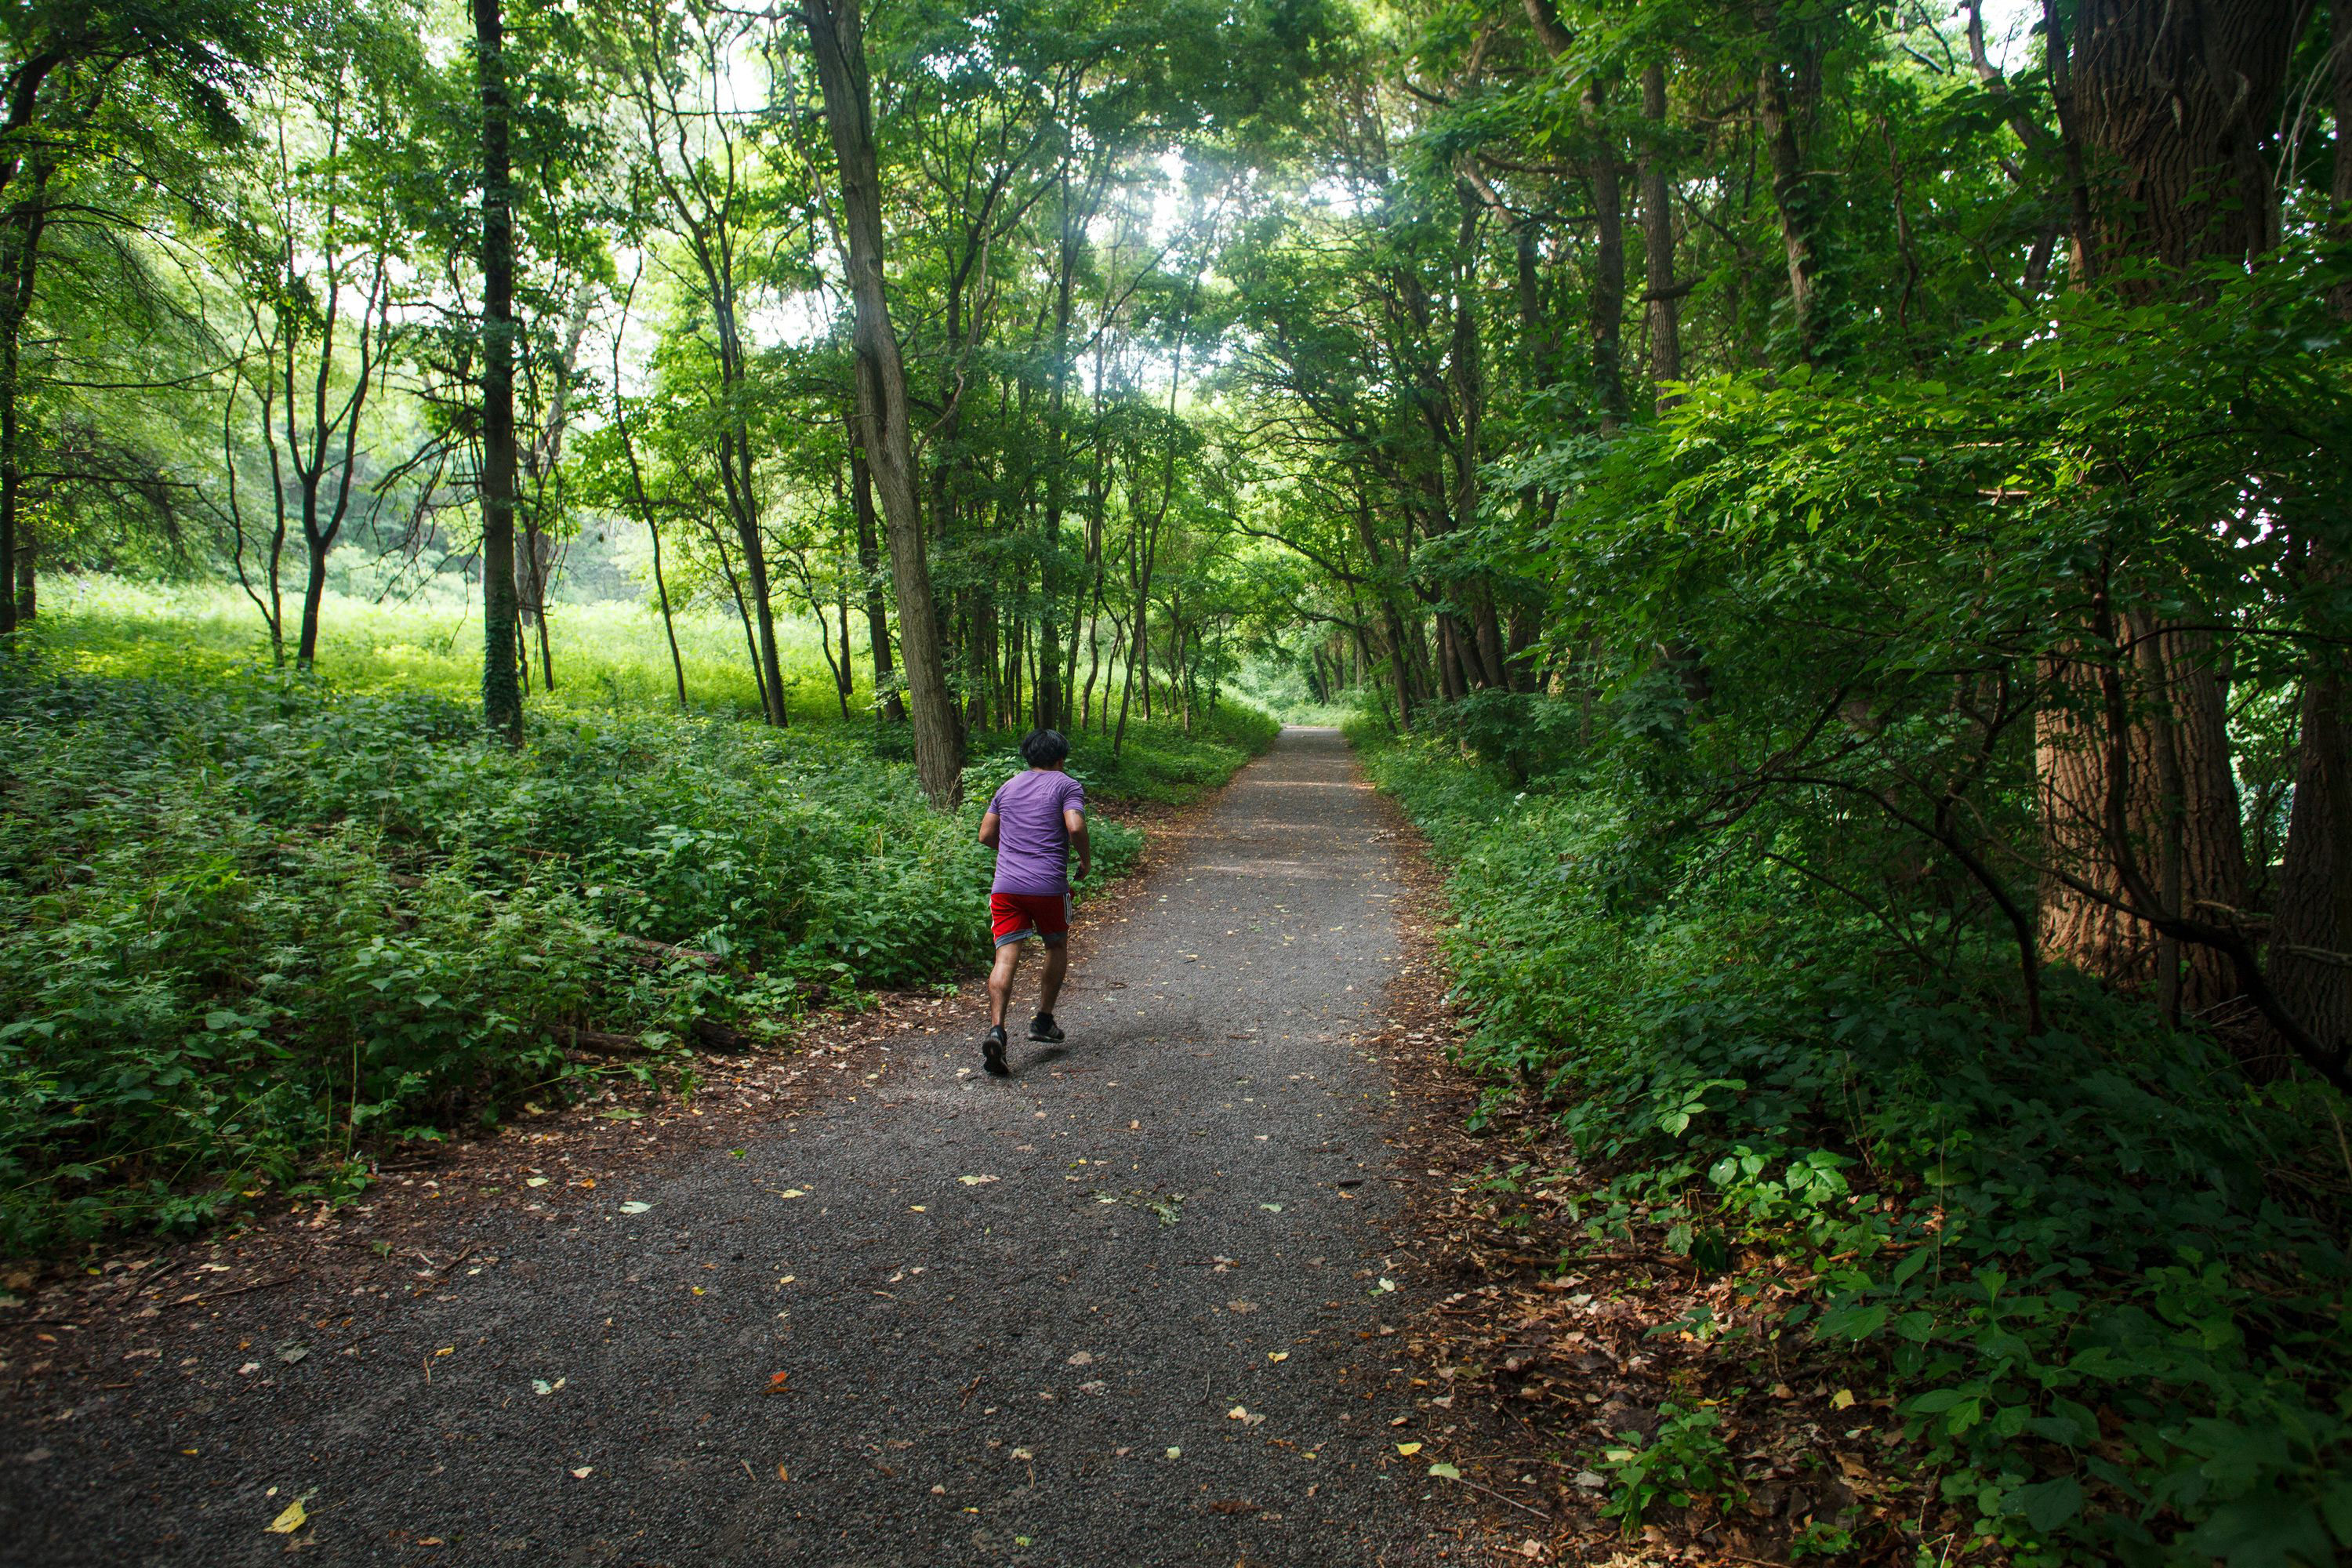 A man in a purple shirt and red shorts runs alone on a lush green running trail in Van Cortlandt Park.